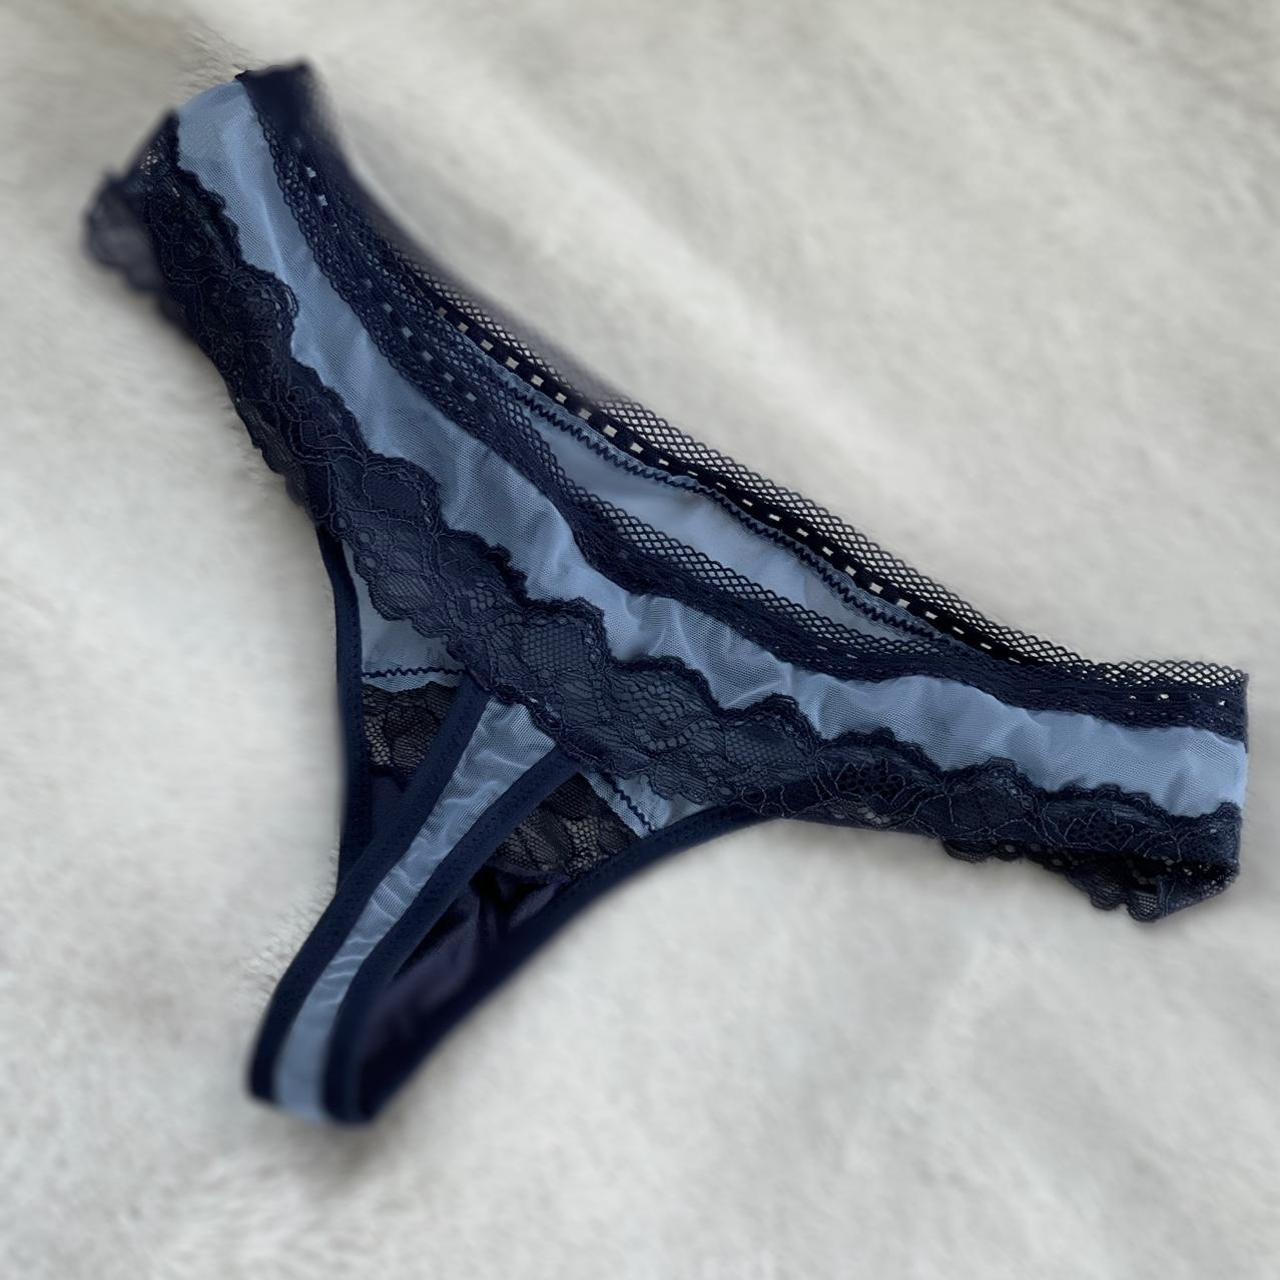 Thistle and spire thong bottom worn once, size small - Depop